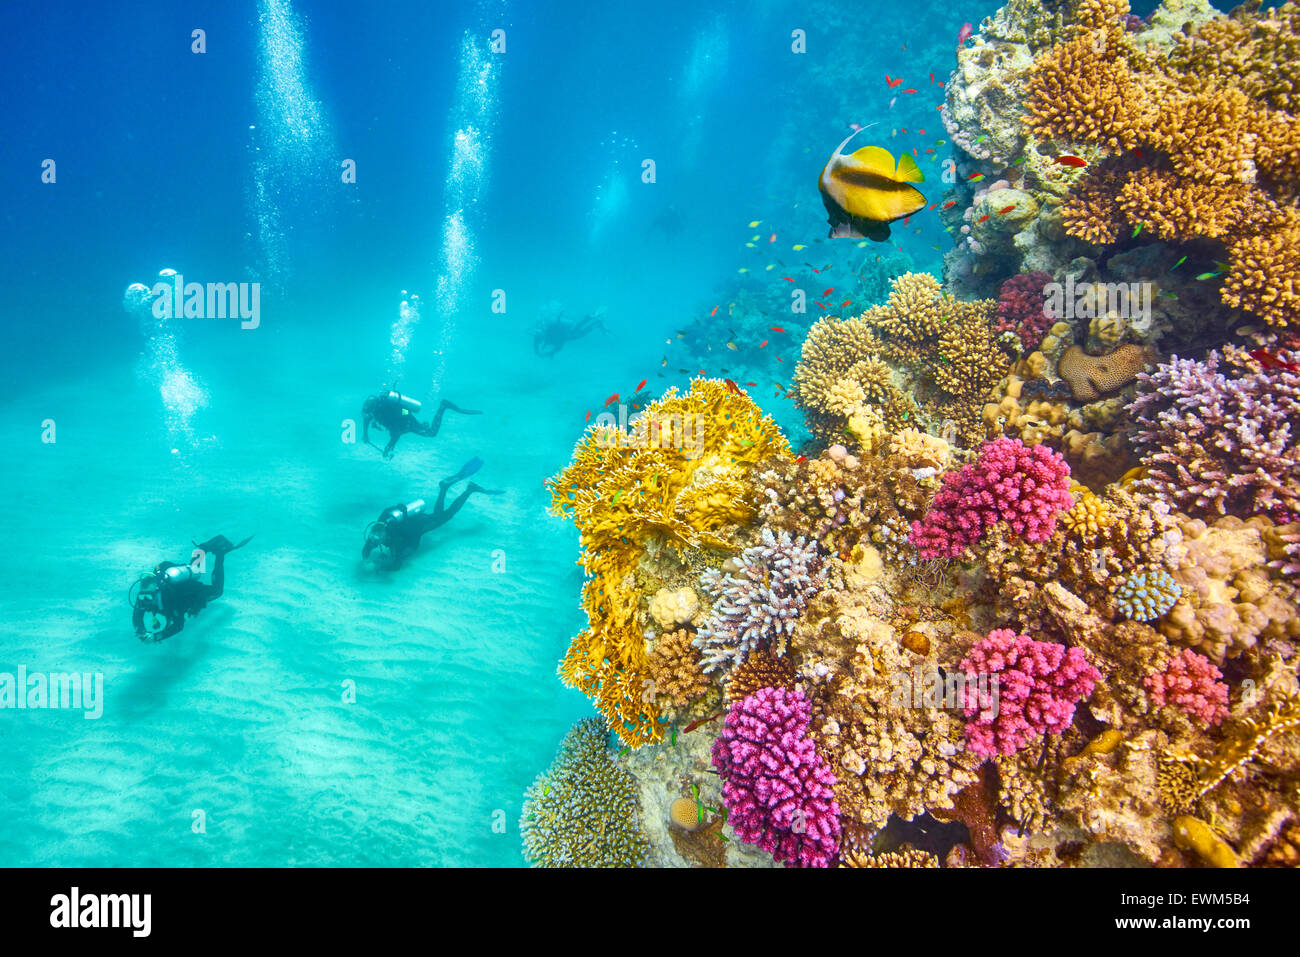 Underwater view at divers and reef, Marsa Alam, Red Sea, Egypt Stock Photo